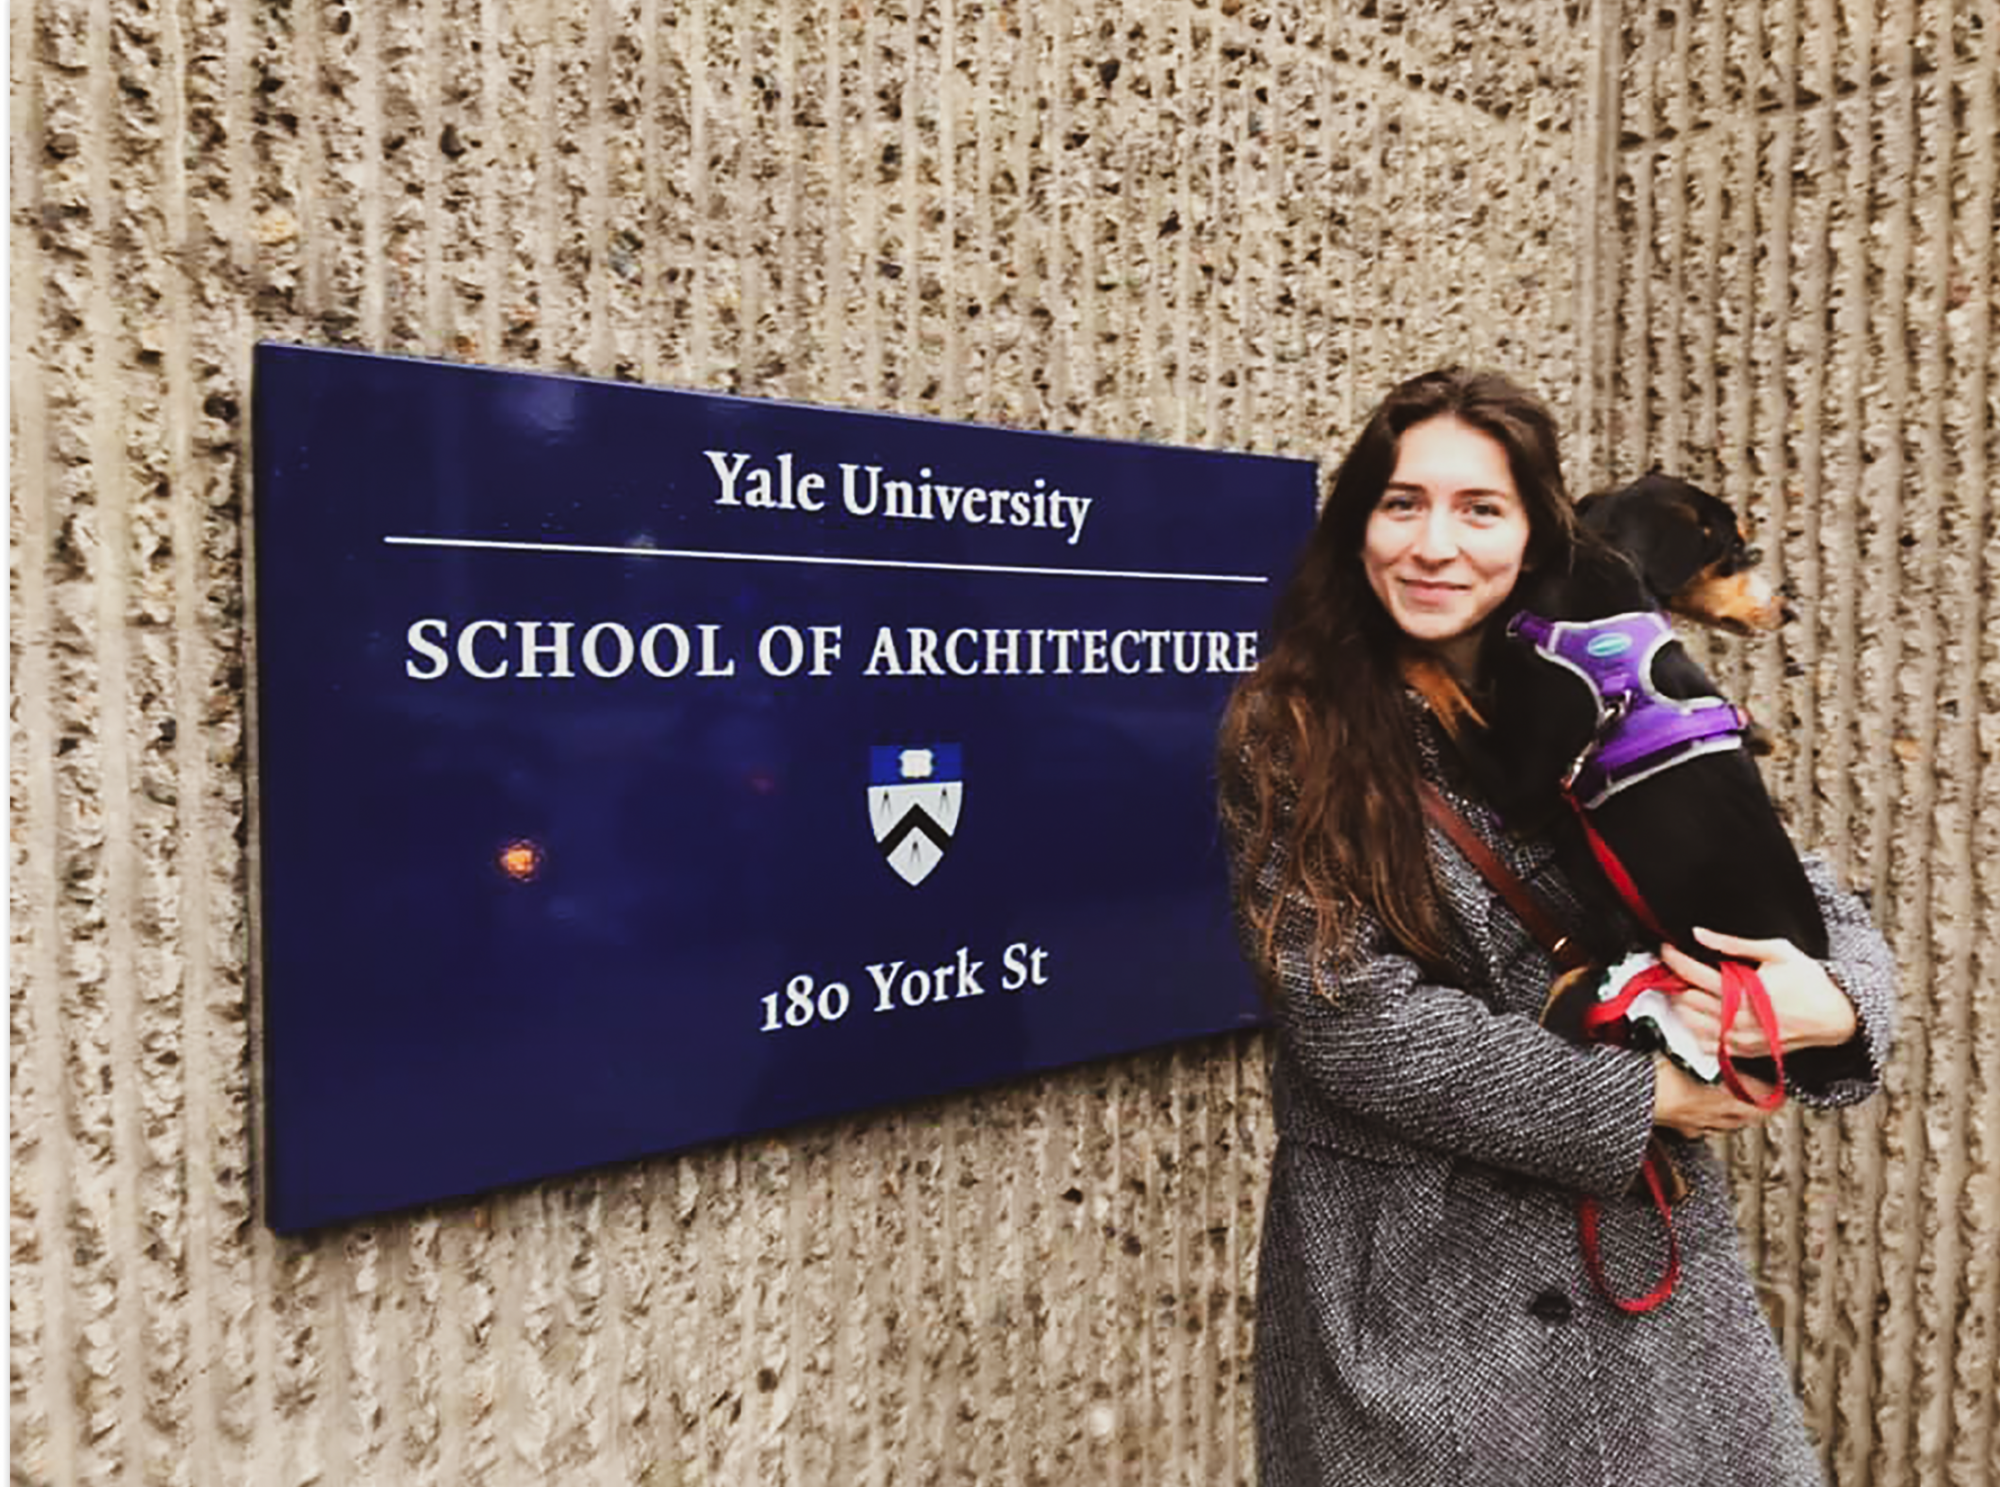 standing in front of the yale sign